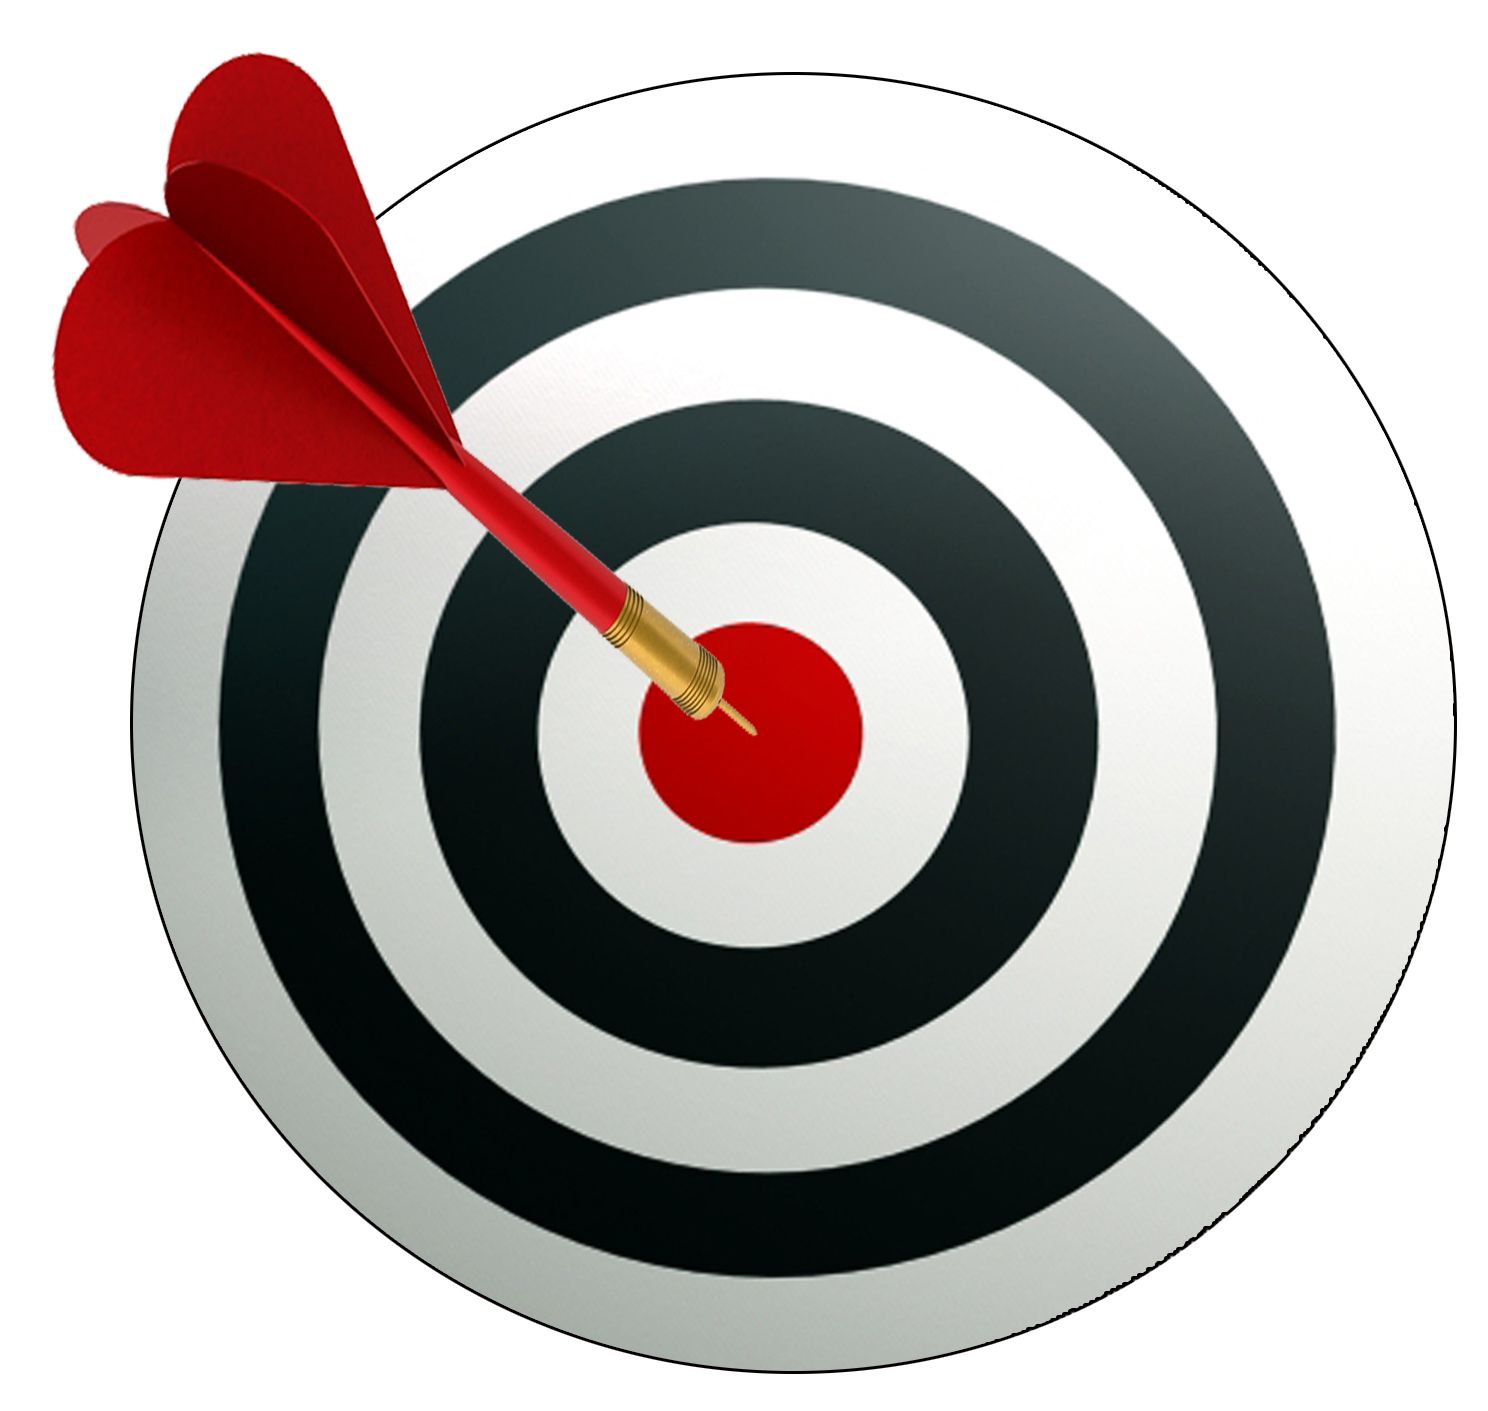 moving target clipart - photo #35